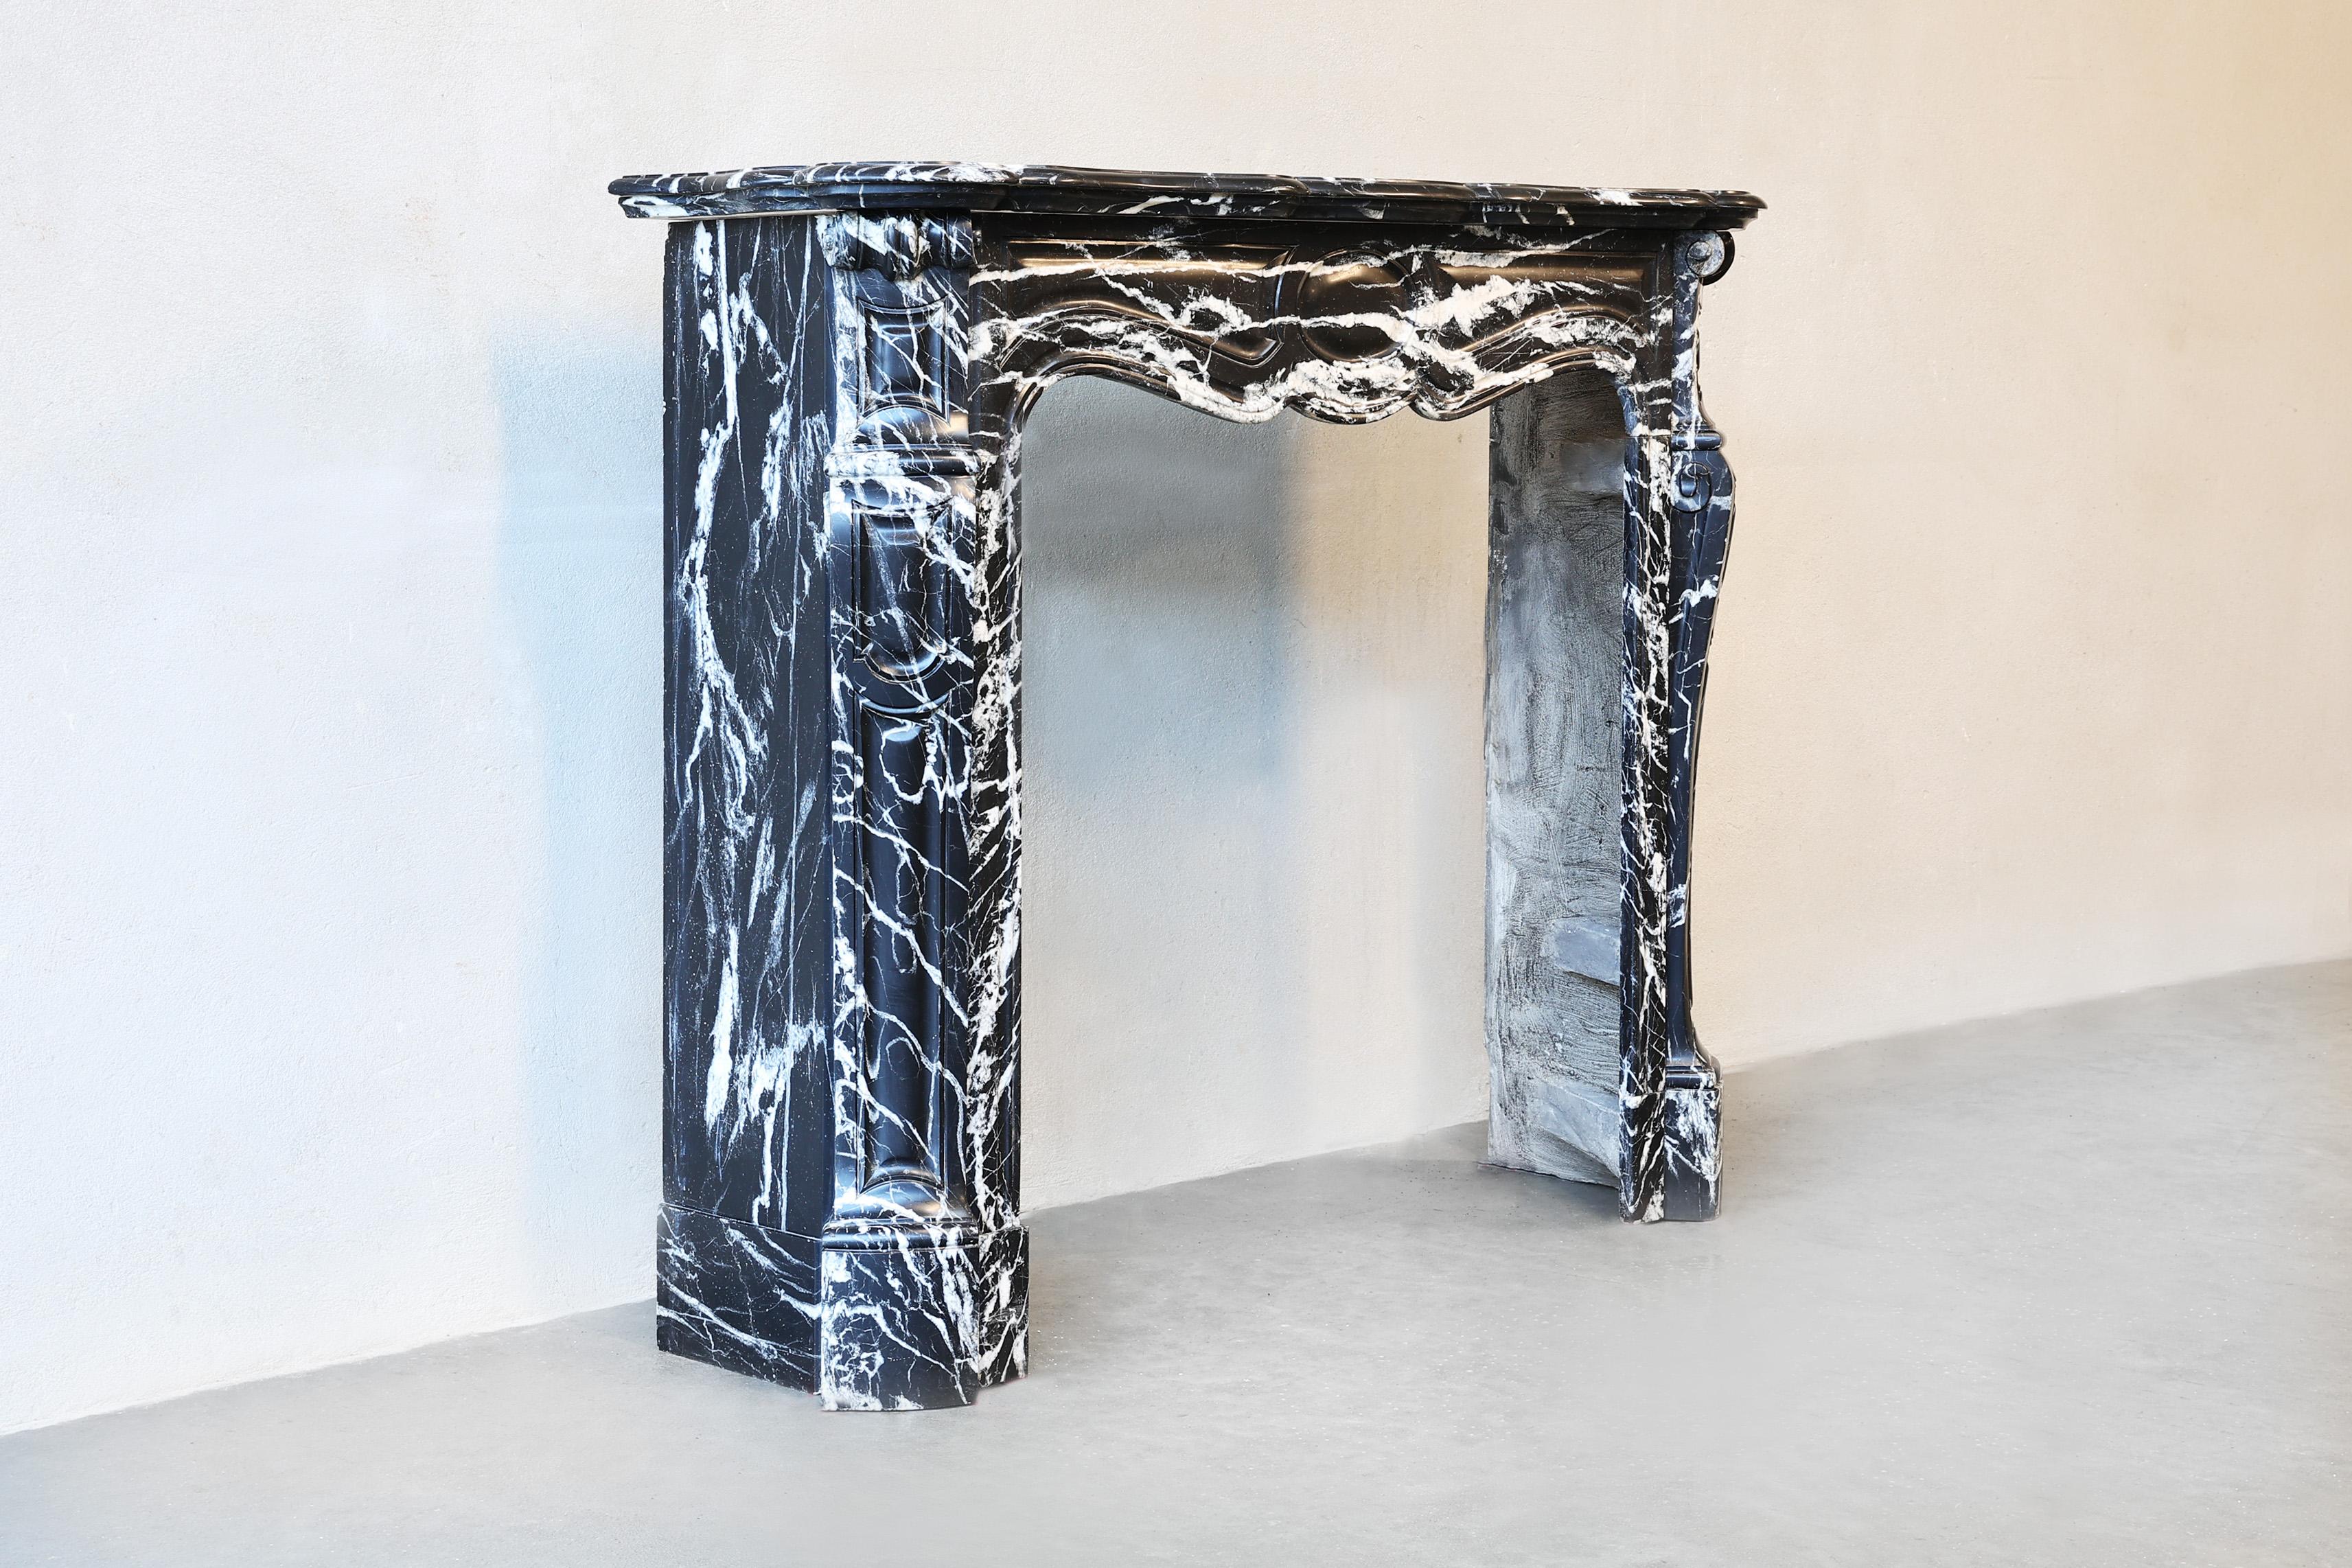 Nero Marquina marble fireplace in the Style of Pompadour from the 19th Century.
Beautiful Pompadour style fireplace from the 19th century! This fireplace is made of Nero Marquina marble and has a chic look. Nero Marquina marble is a black marble